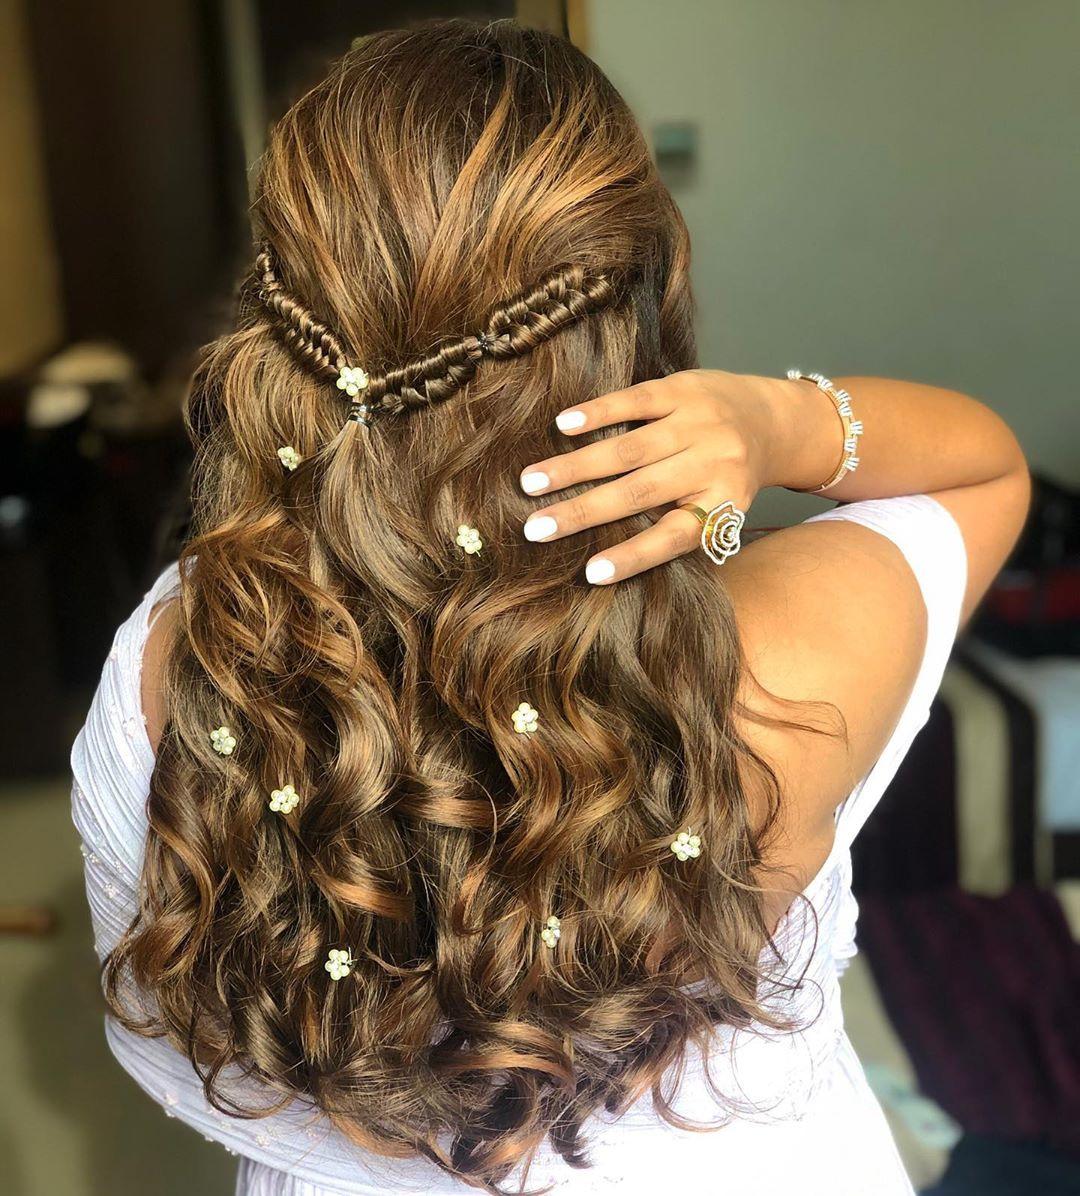 25 Easy Party Hairstyles That Will Leave You Mesmerized